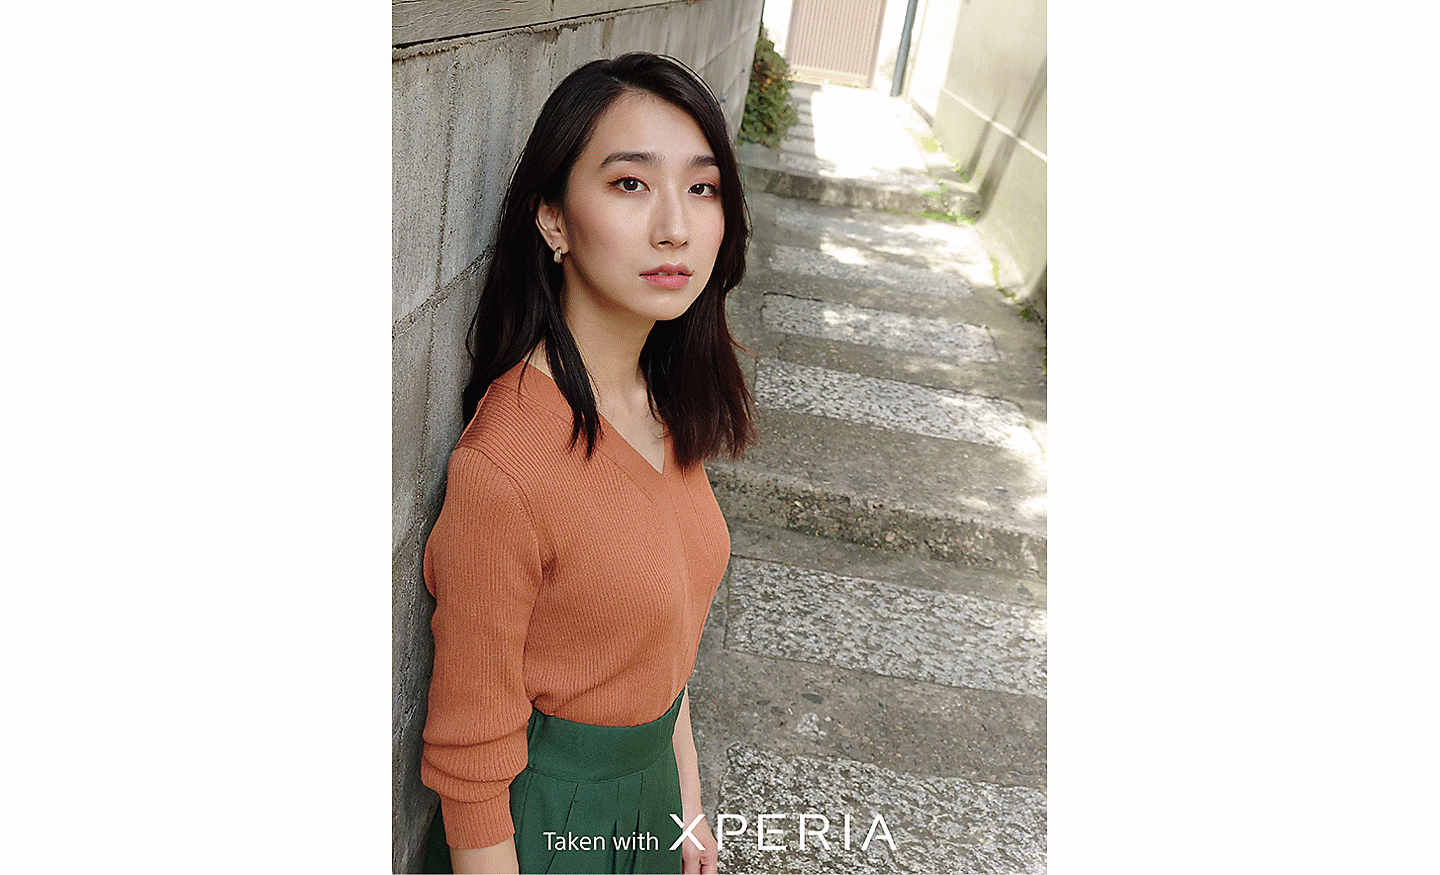 Portrait of a woman on some stone steps. Text reads "Taken with XPERIA".